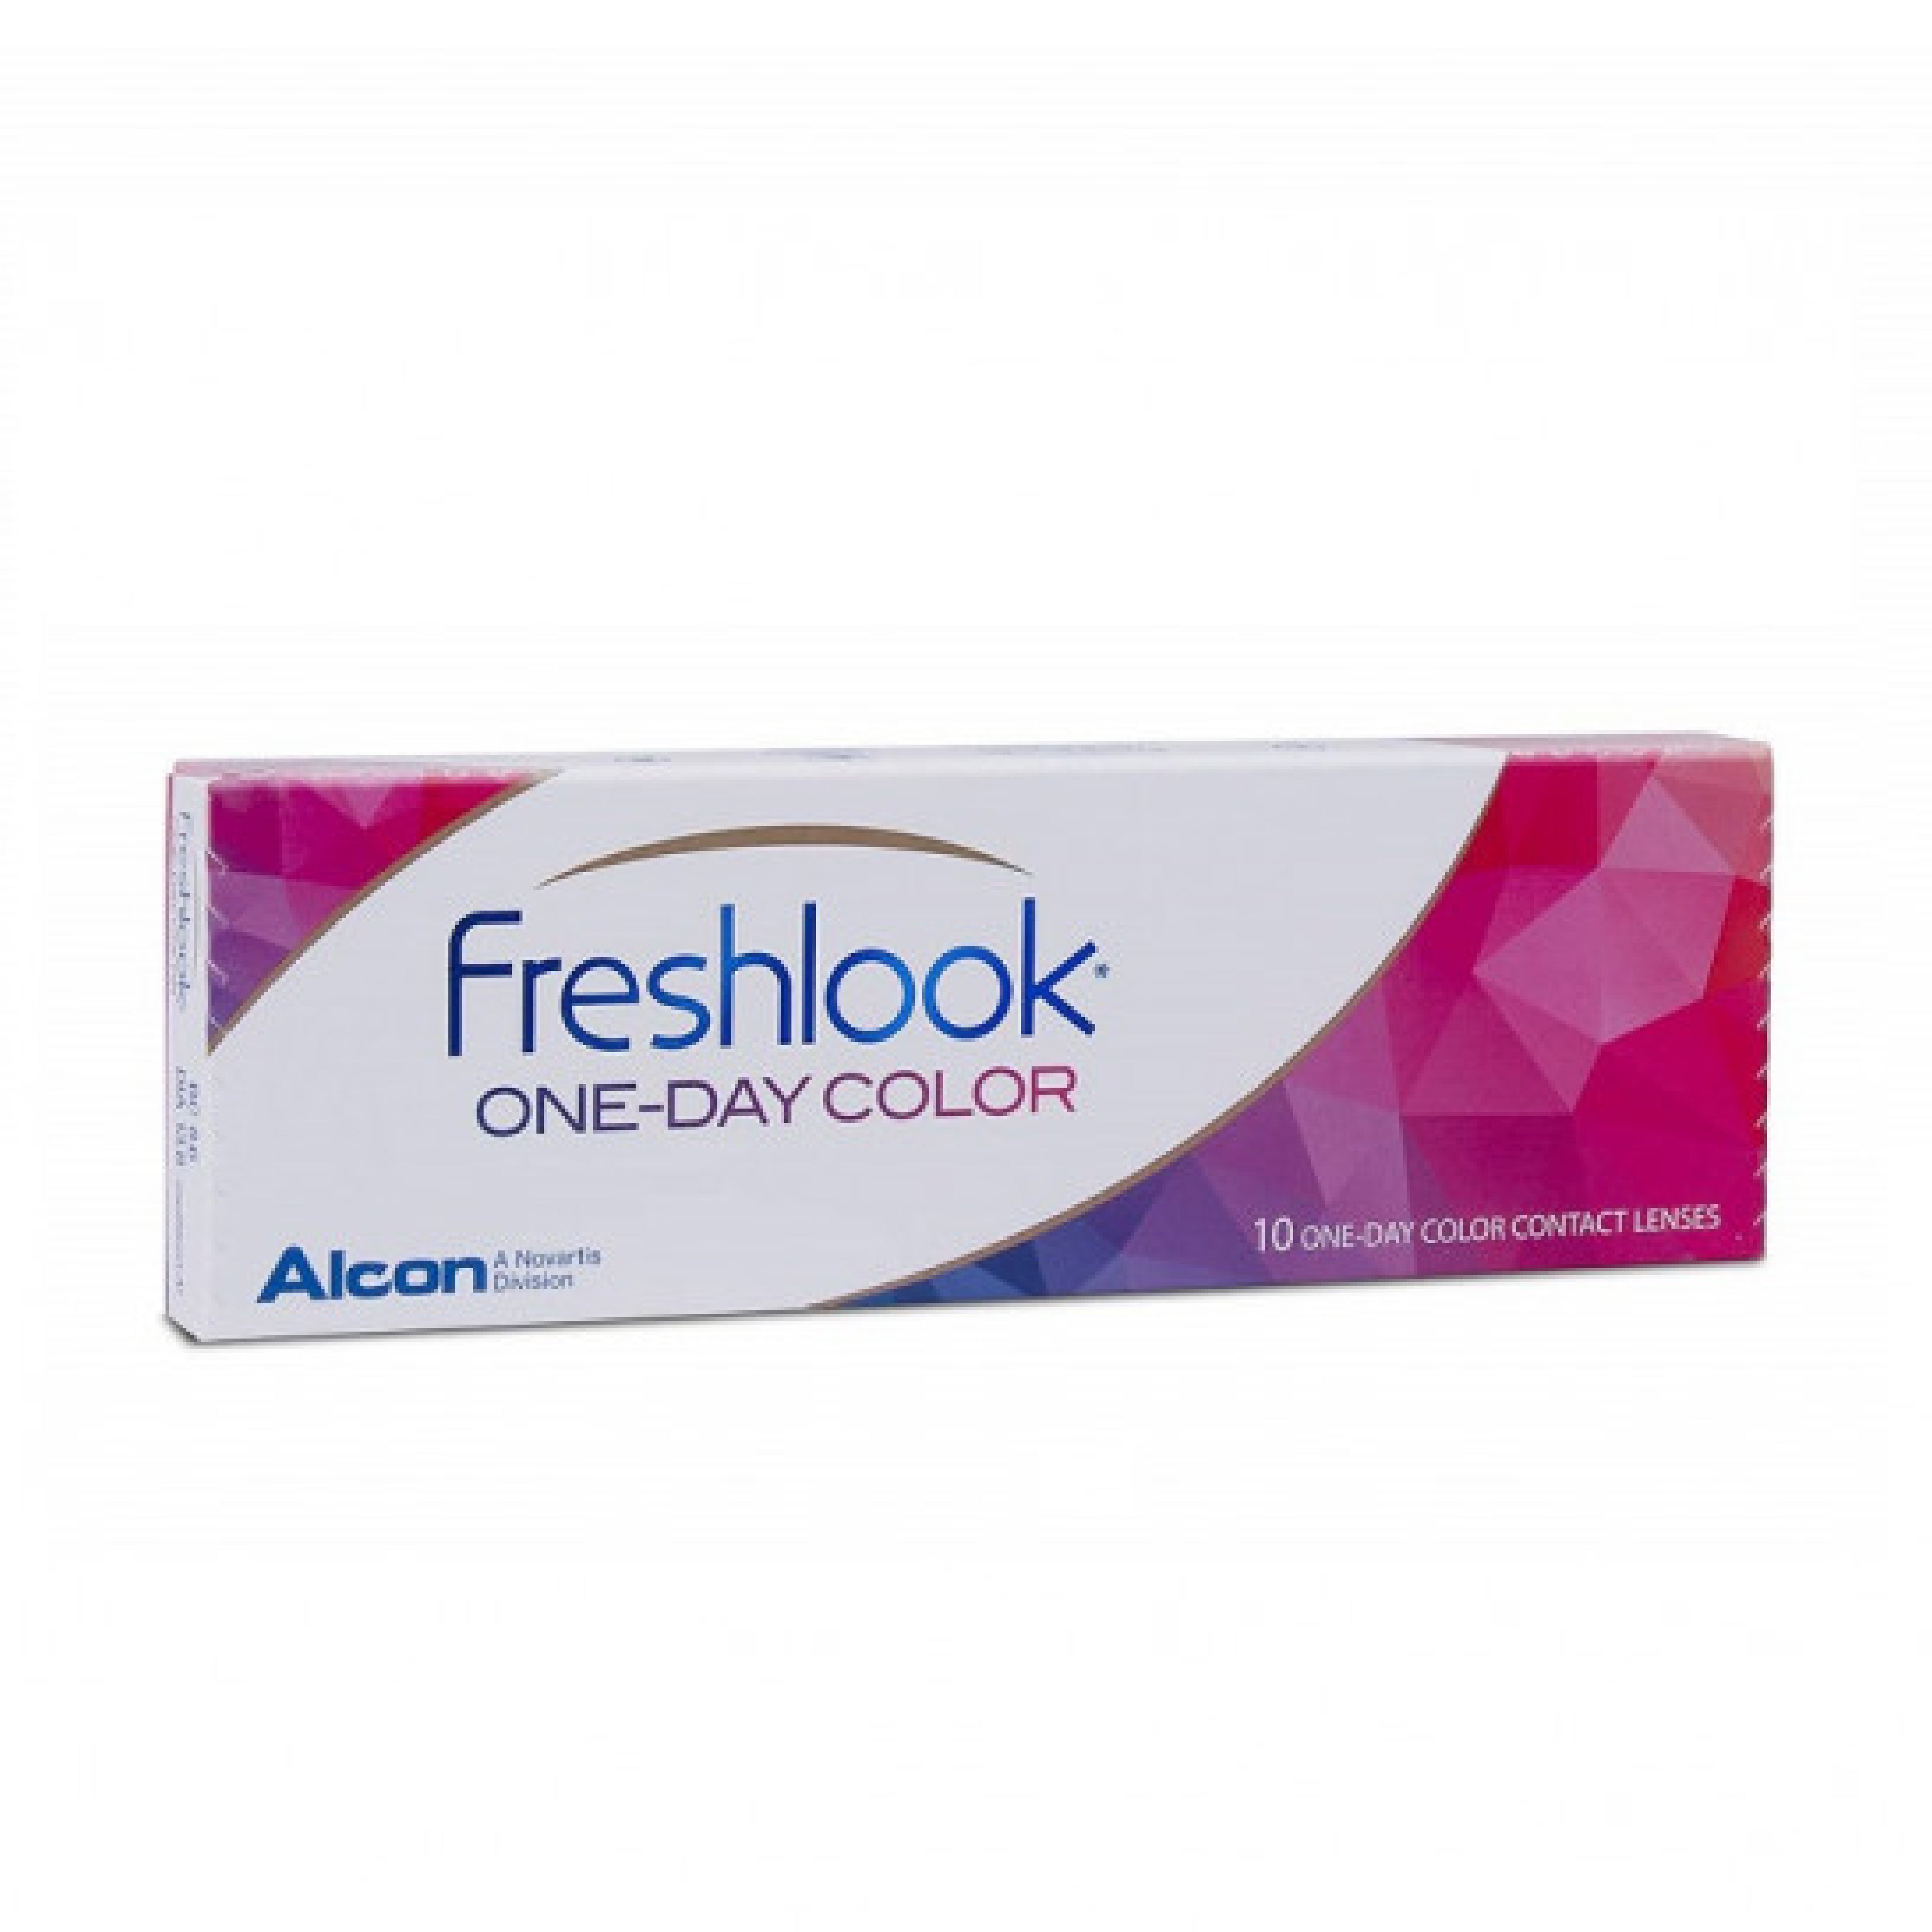 Freshlook One-Day Colorblends (10 PCS)